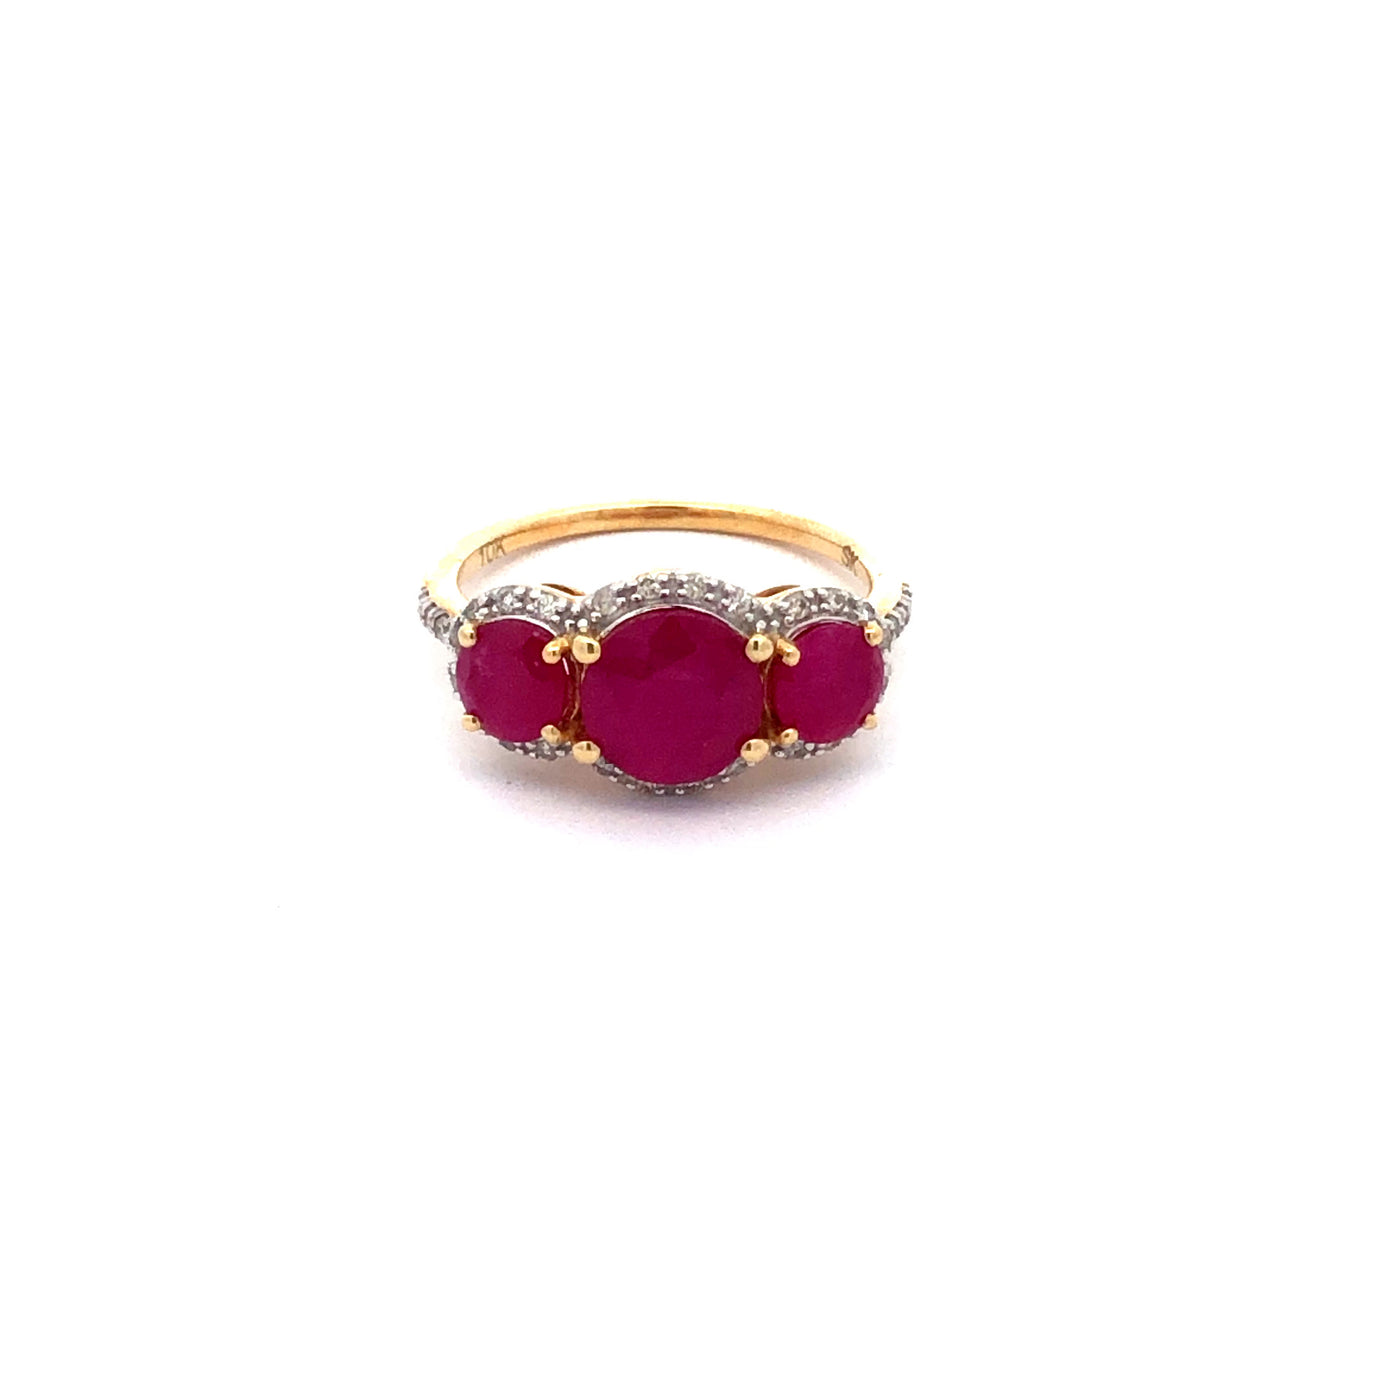 10Ct Yellow Gold Trilogy Ruby And Diamond Halo Ring.